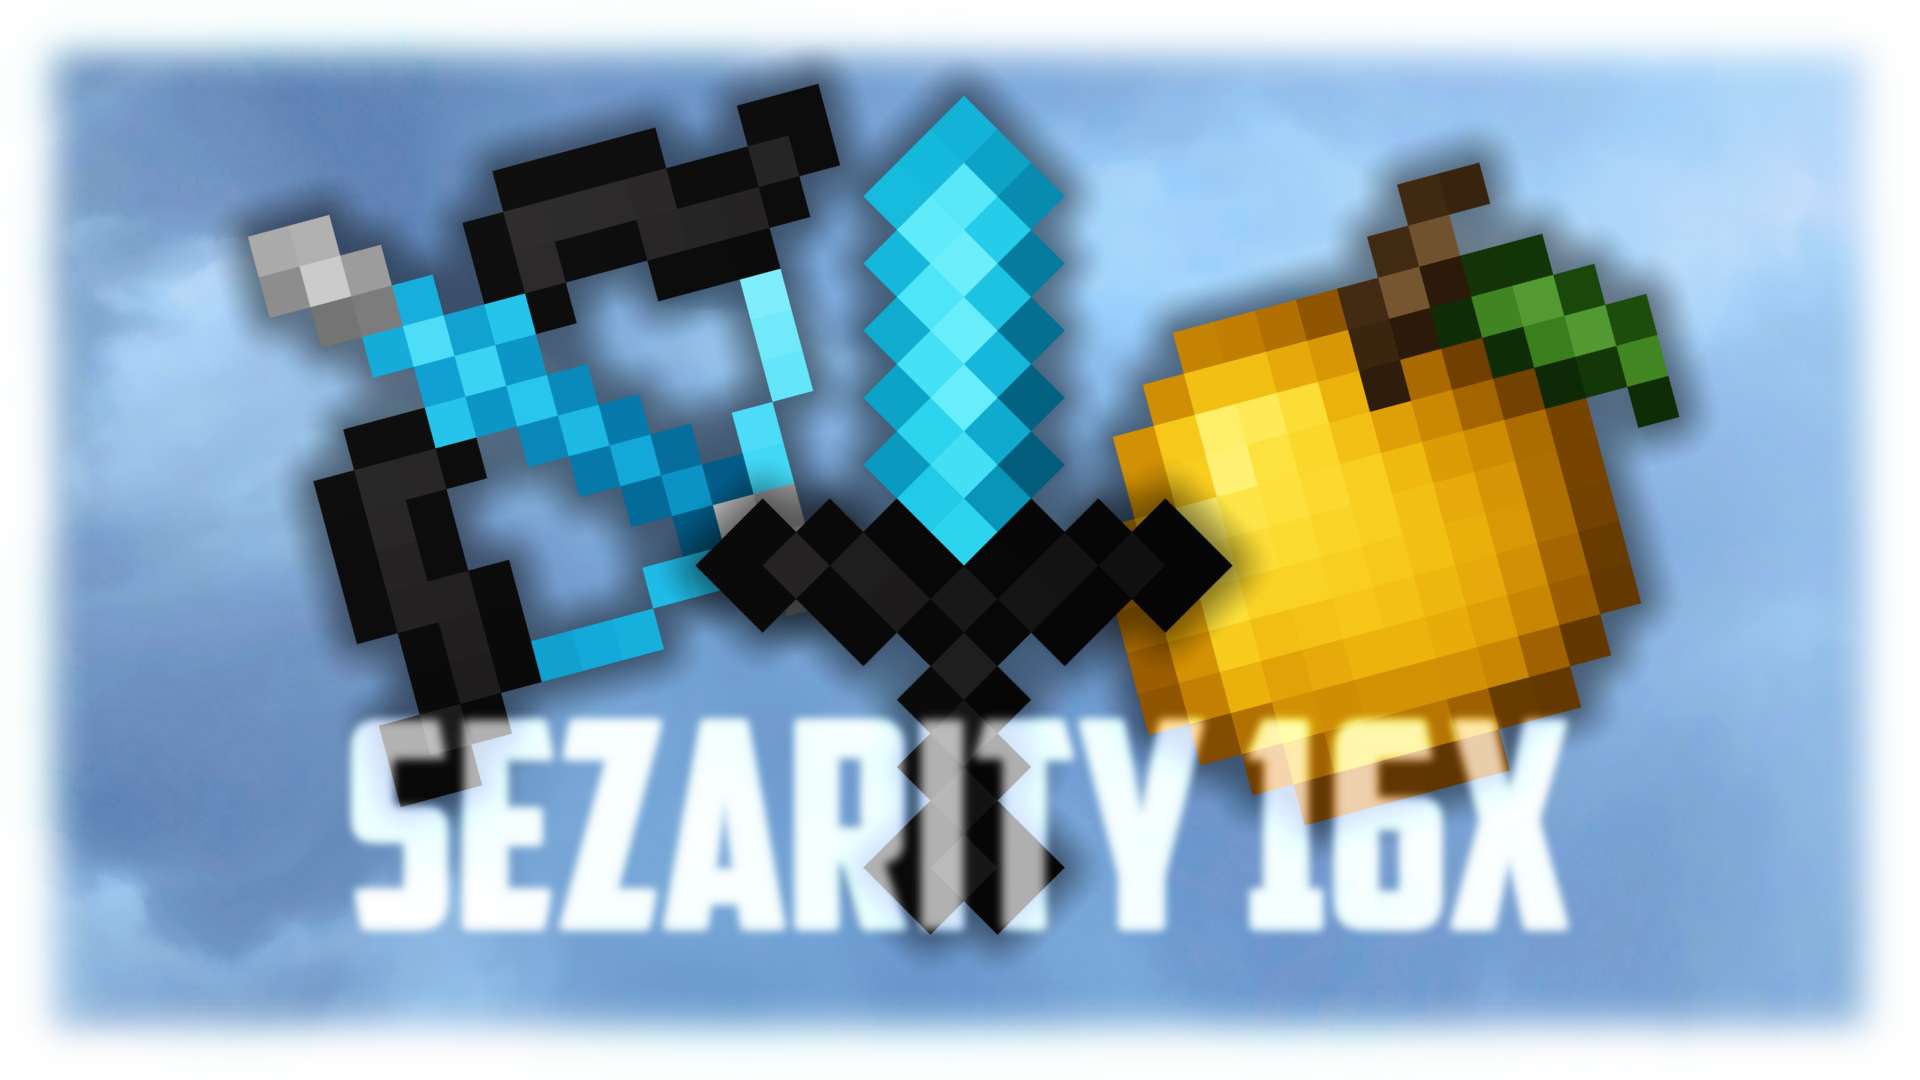 Sezarity 16 by Zlax on PvPRP